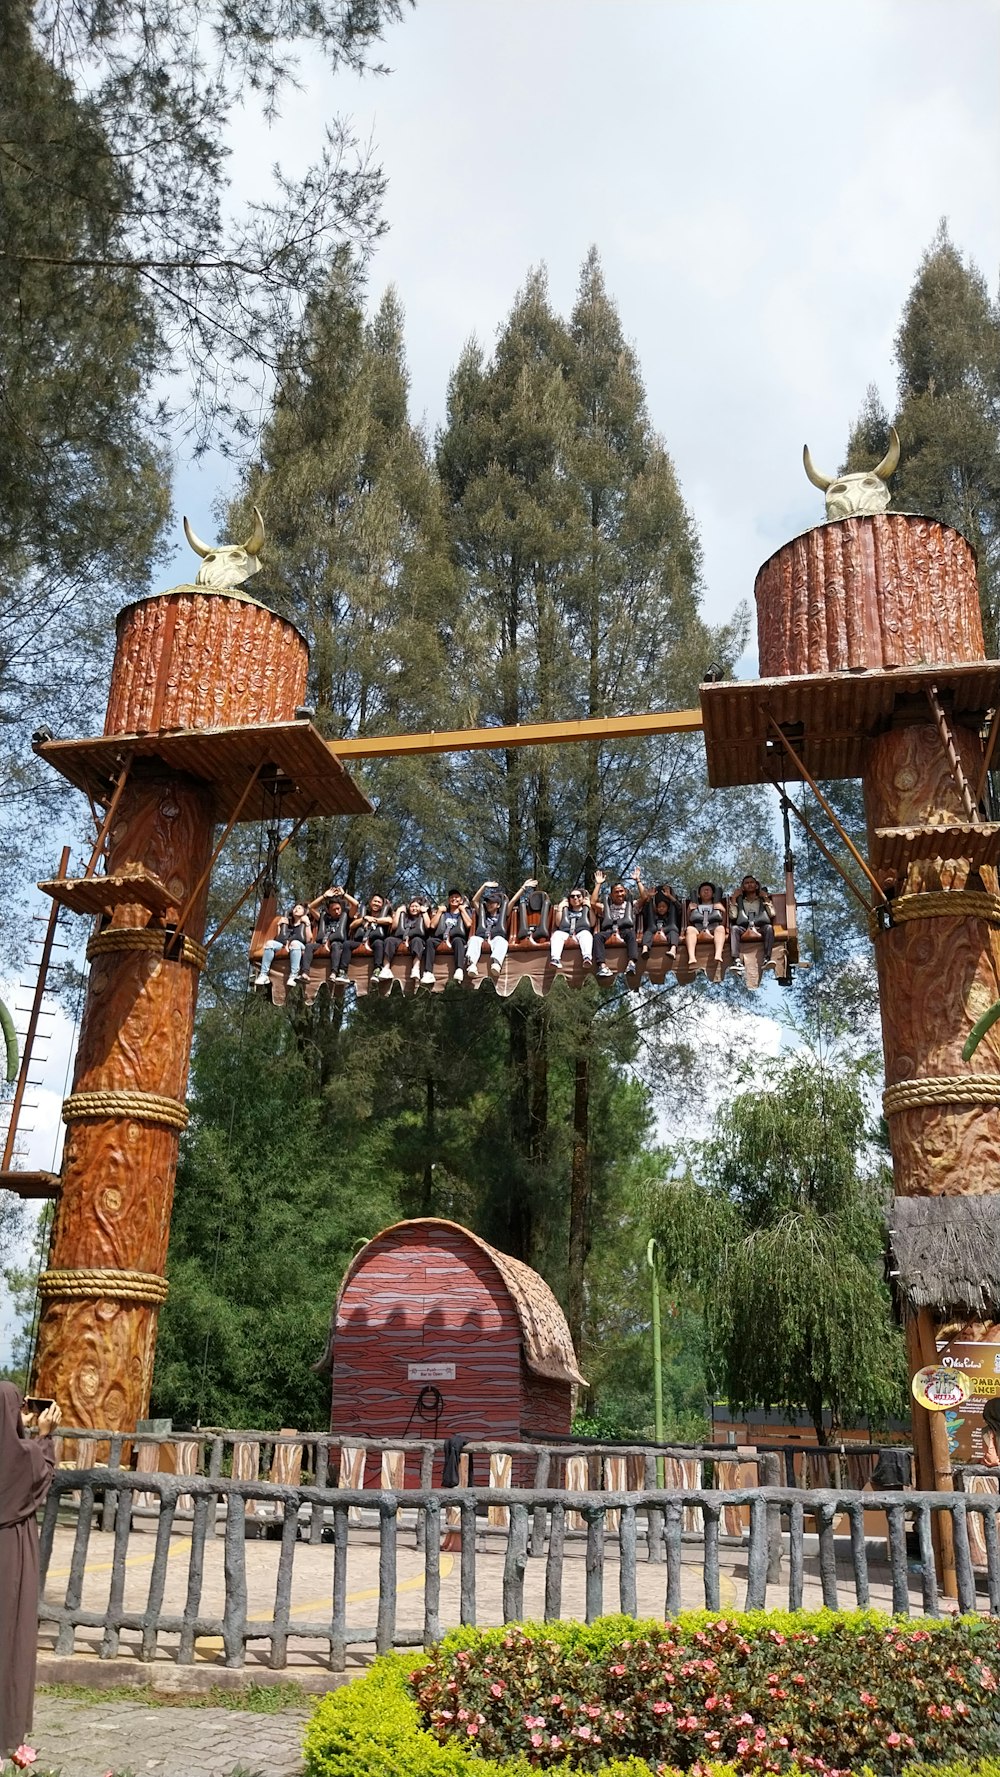 a group of people hanging from a wooden structure